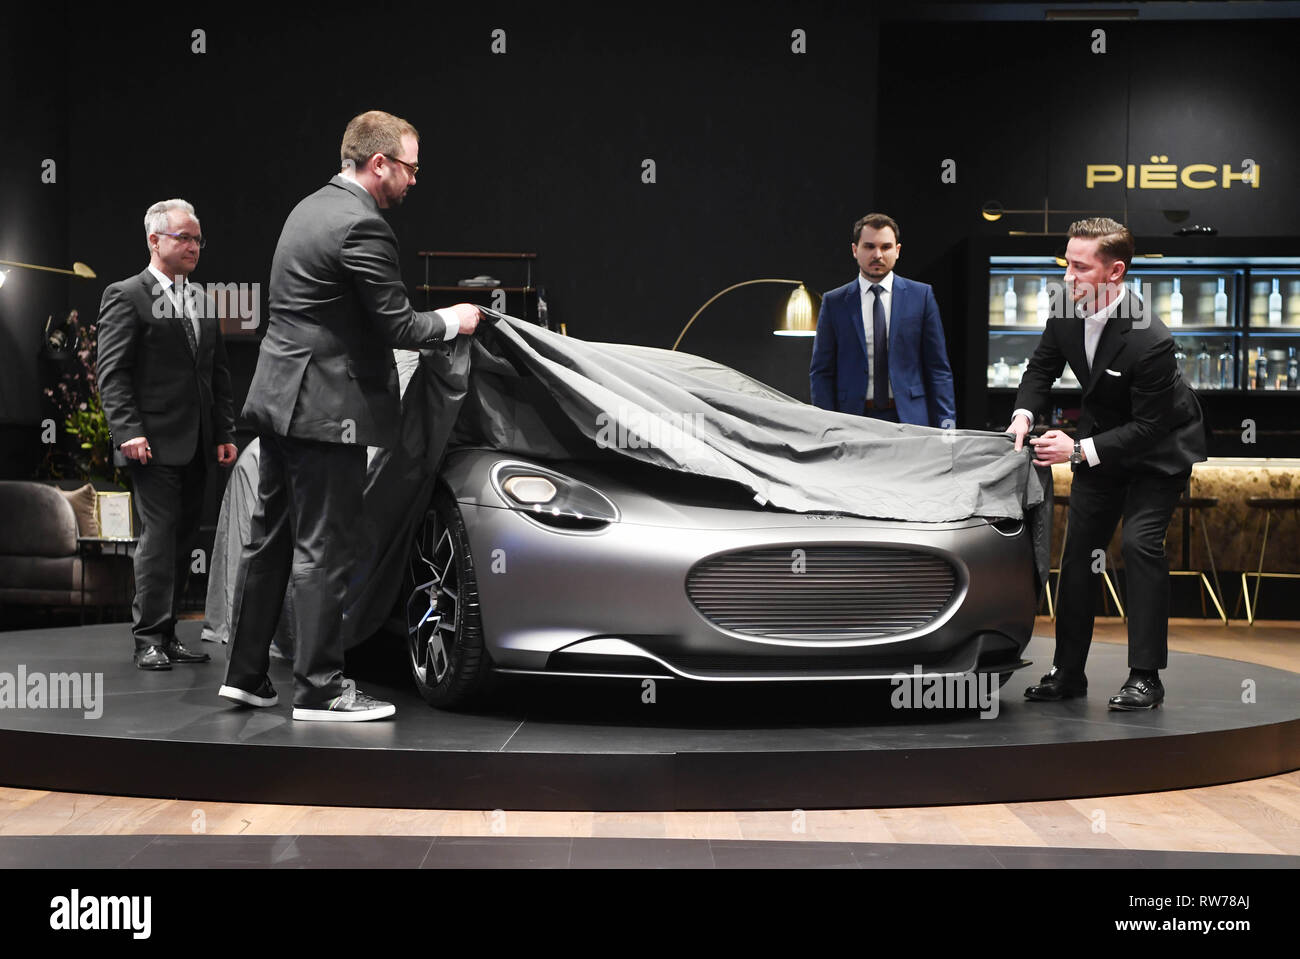 Genf, Switzerland. 05th Mar, 2019. Anton Piech (l front), a son of former VW boss Ferdinand Piech, and Rea Stark Rajcic, both managing directors of Piech Automotive, present the electrically powered Piech Mark Zero sports car at the Geneva Motor Show on the first press day. The 89th Geneva Motor Show starts on 7 March and lasts until 17 March. Credit: Uli Deck/dpa/Alamy Live News Stock Photo